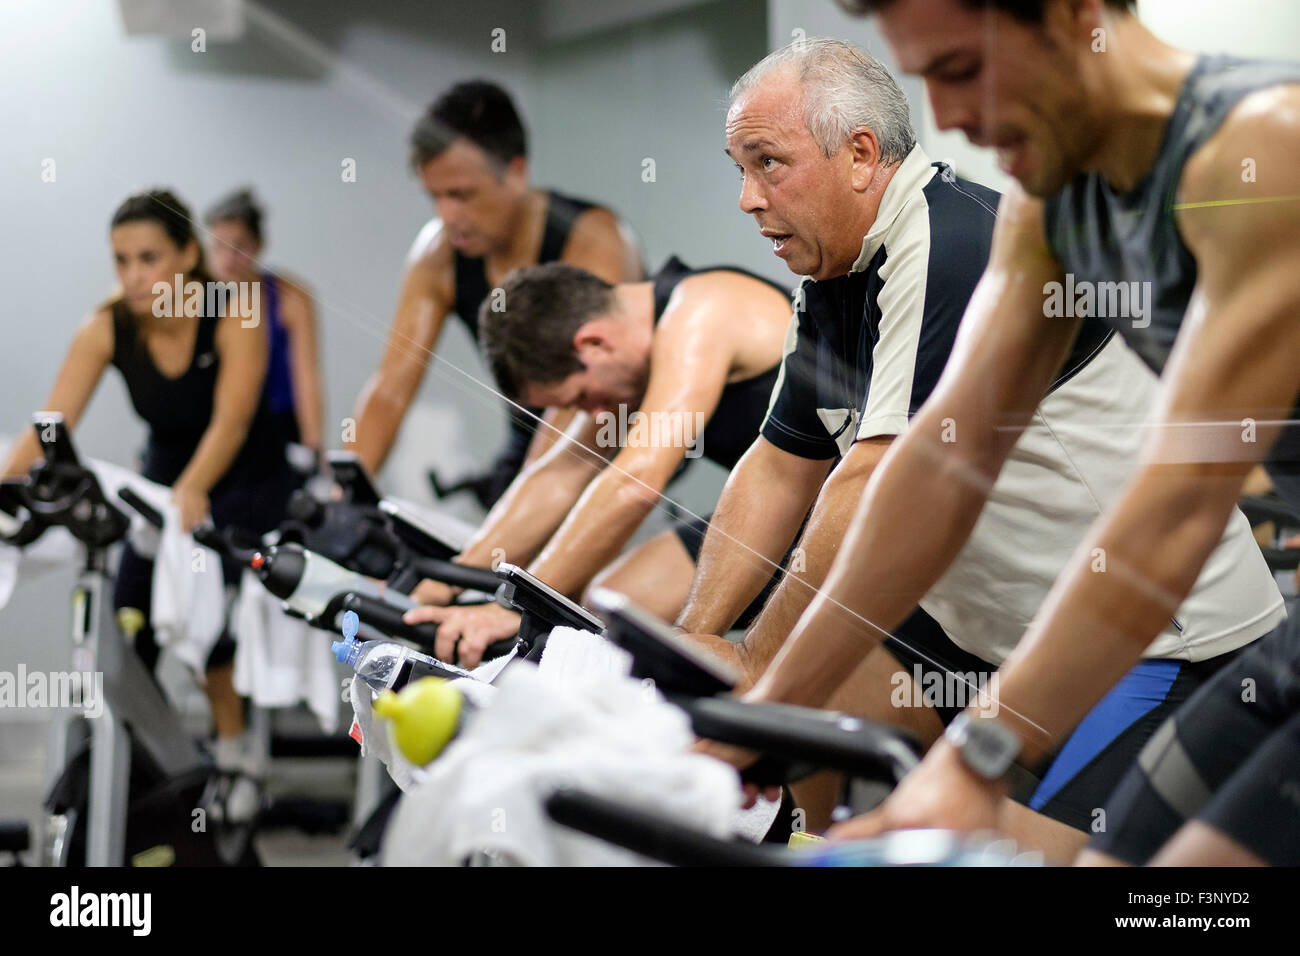 Side view of people riding stationary bicycles during a spinning class at the gym Stock Photo